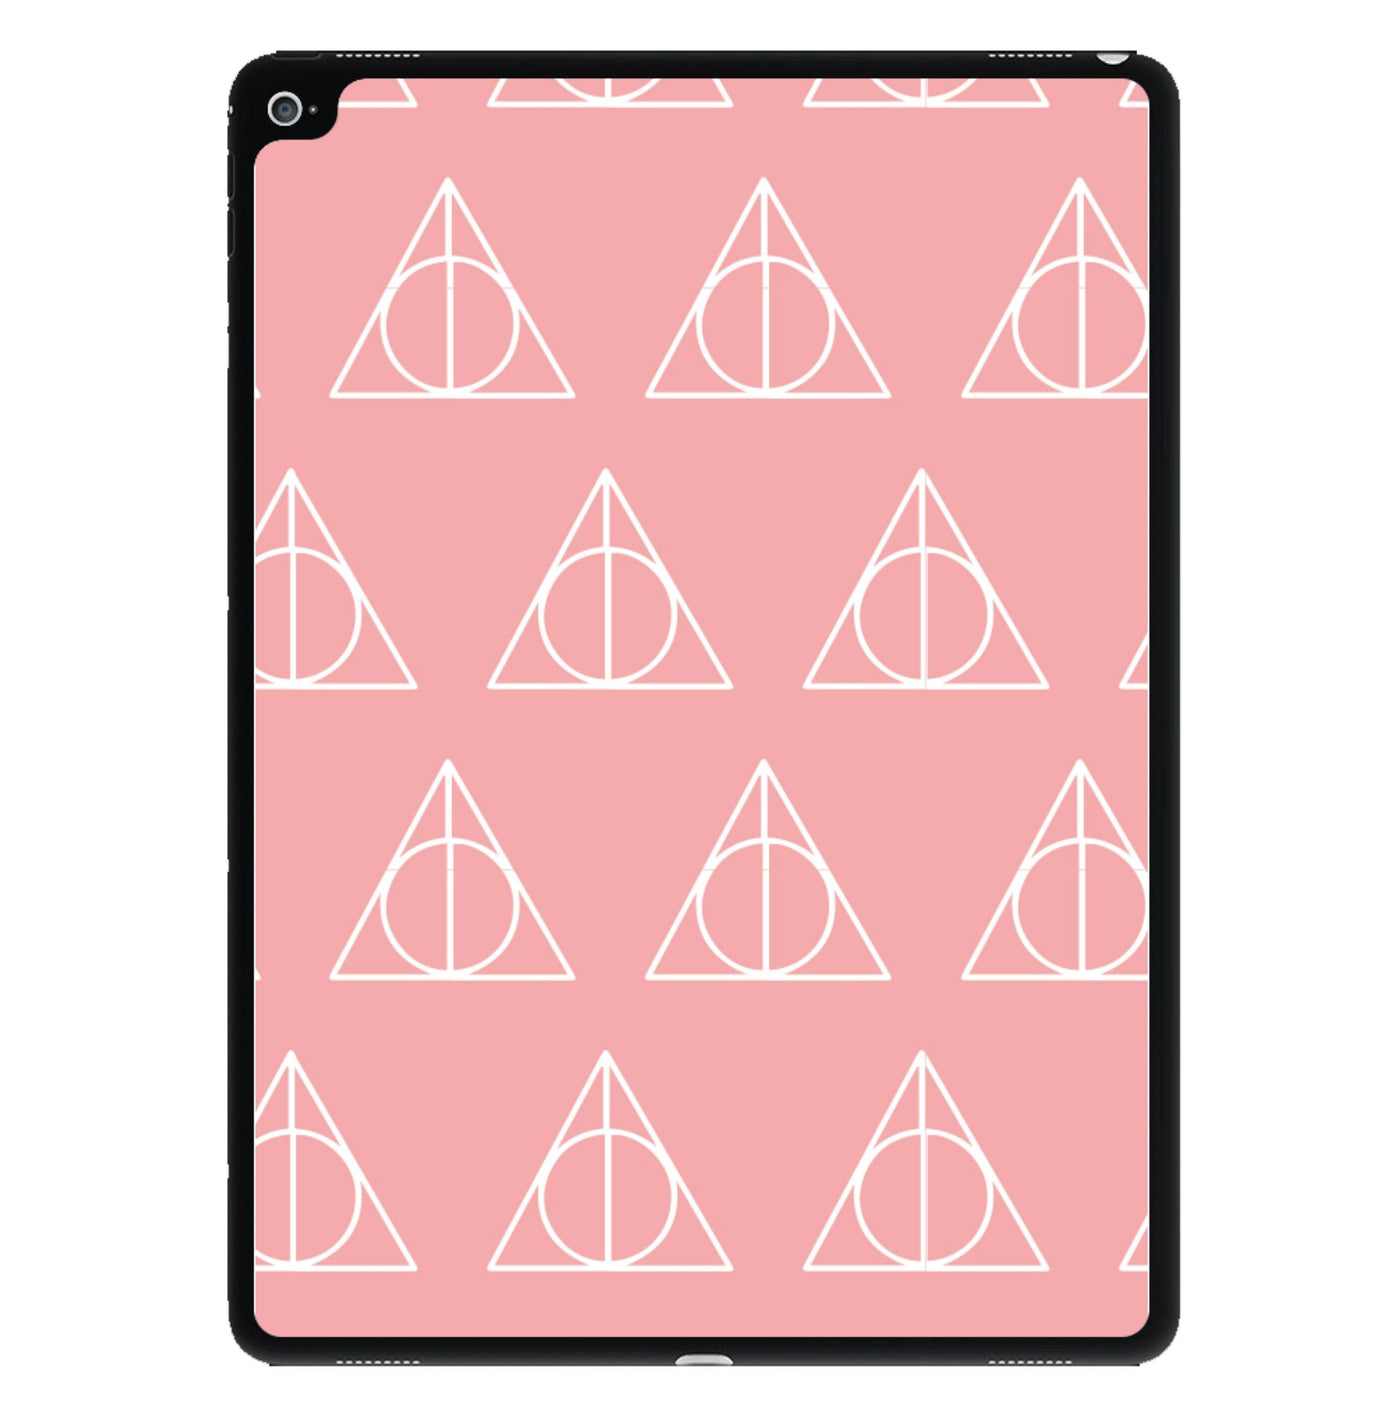 The Deathly Hallows Symbol Pattern - Harry Potter iPad Case